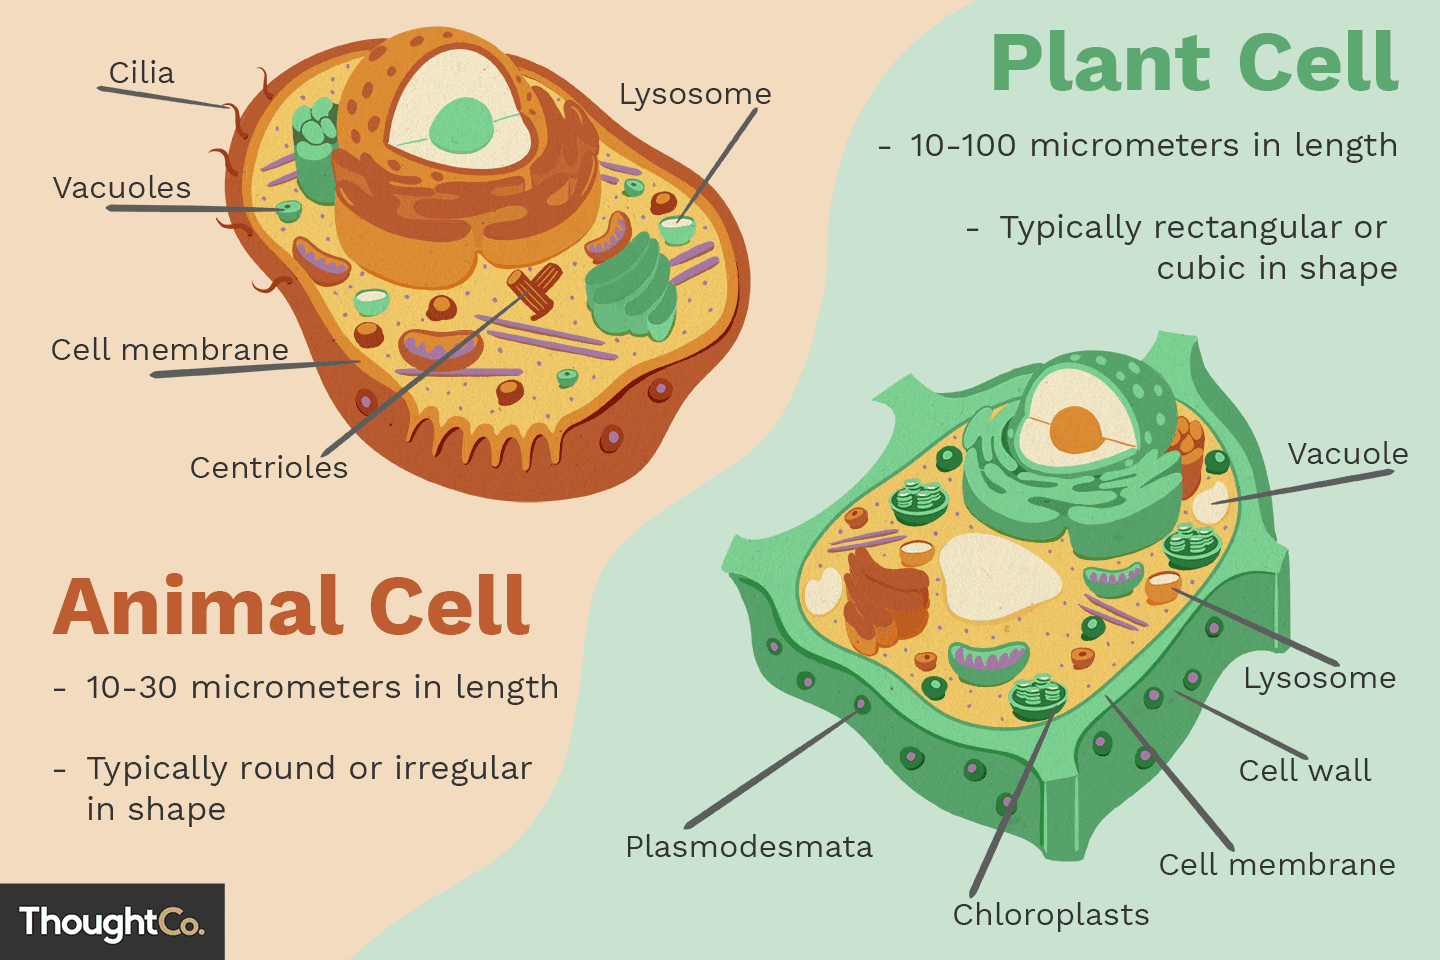 Plant Cell Diagram Differences Between Plant And Animal Cells